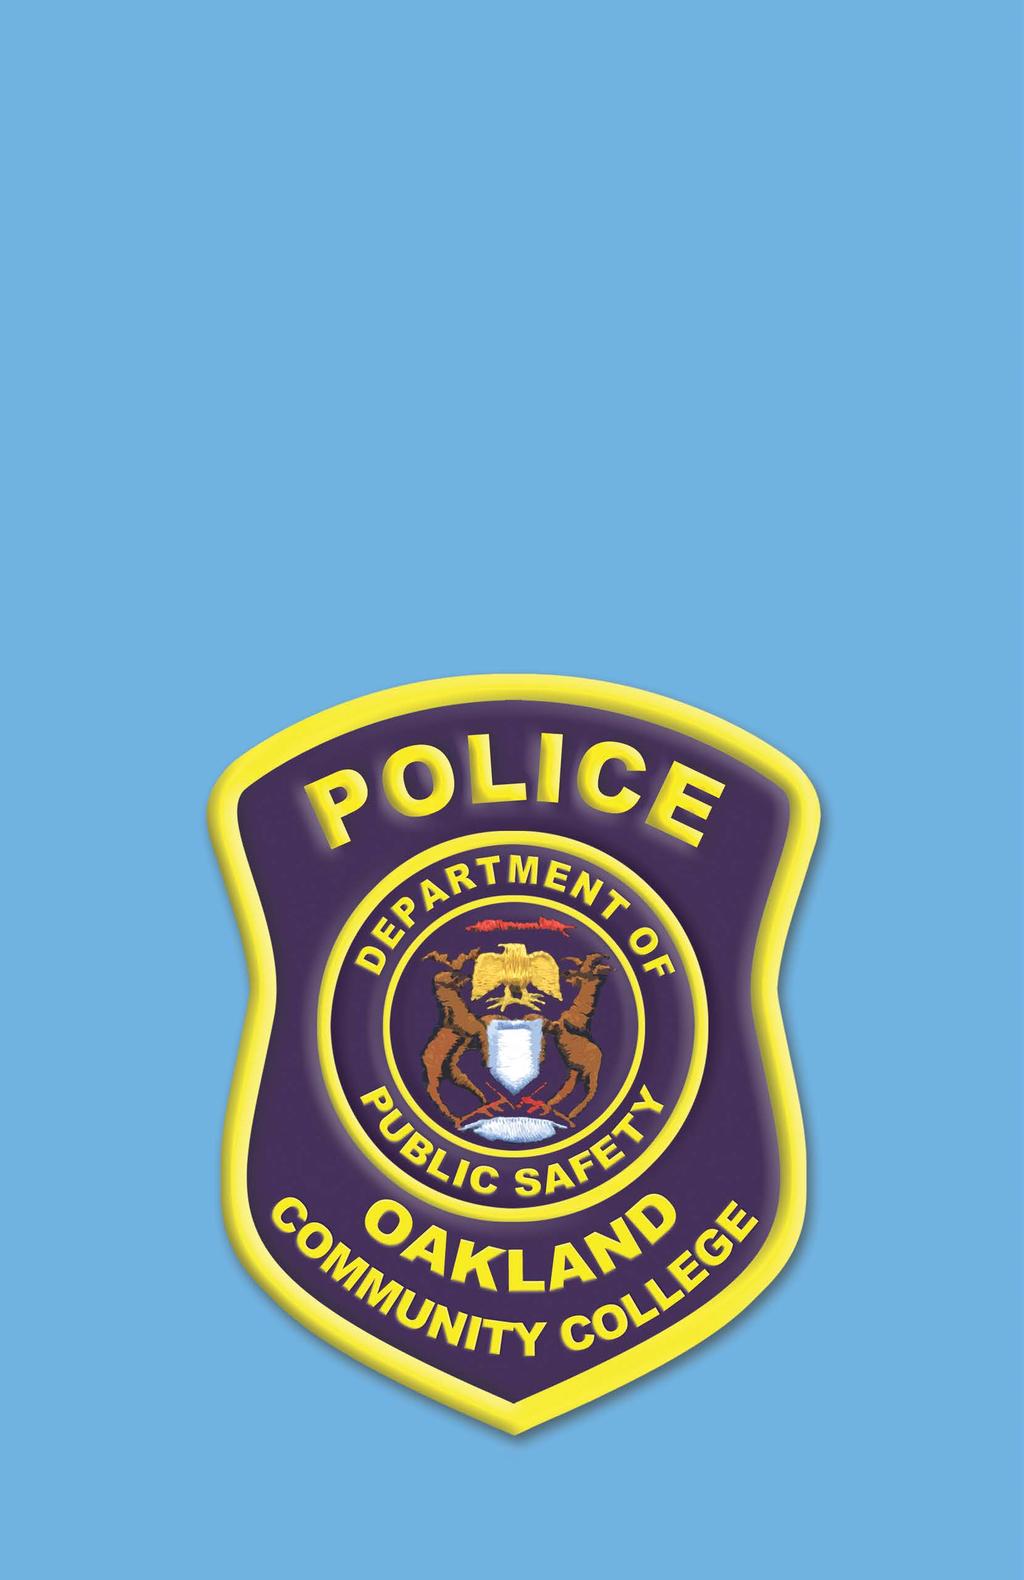 Oakland Community College STUDENT SAFETY